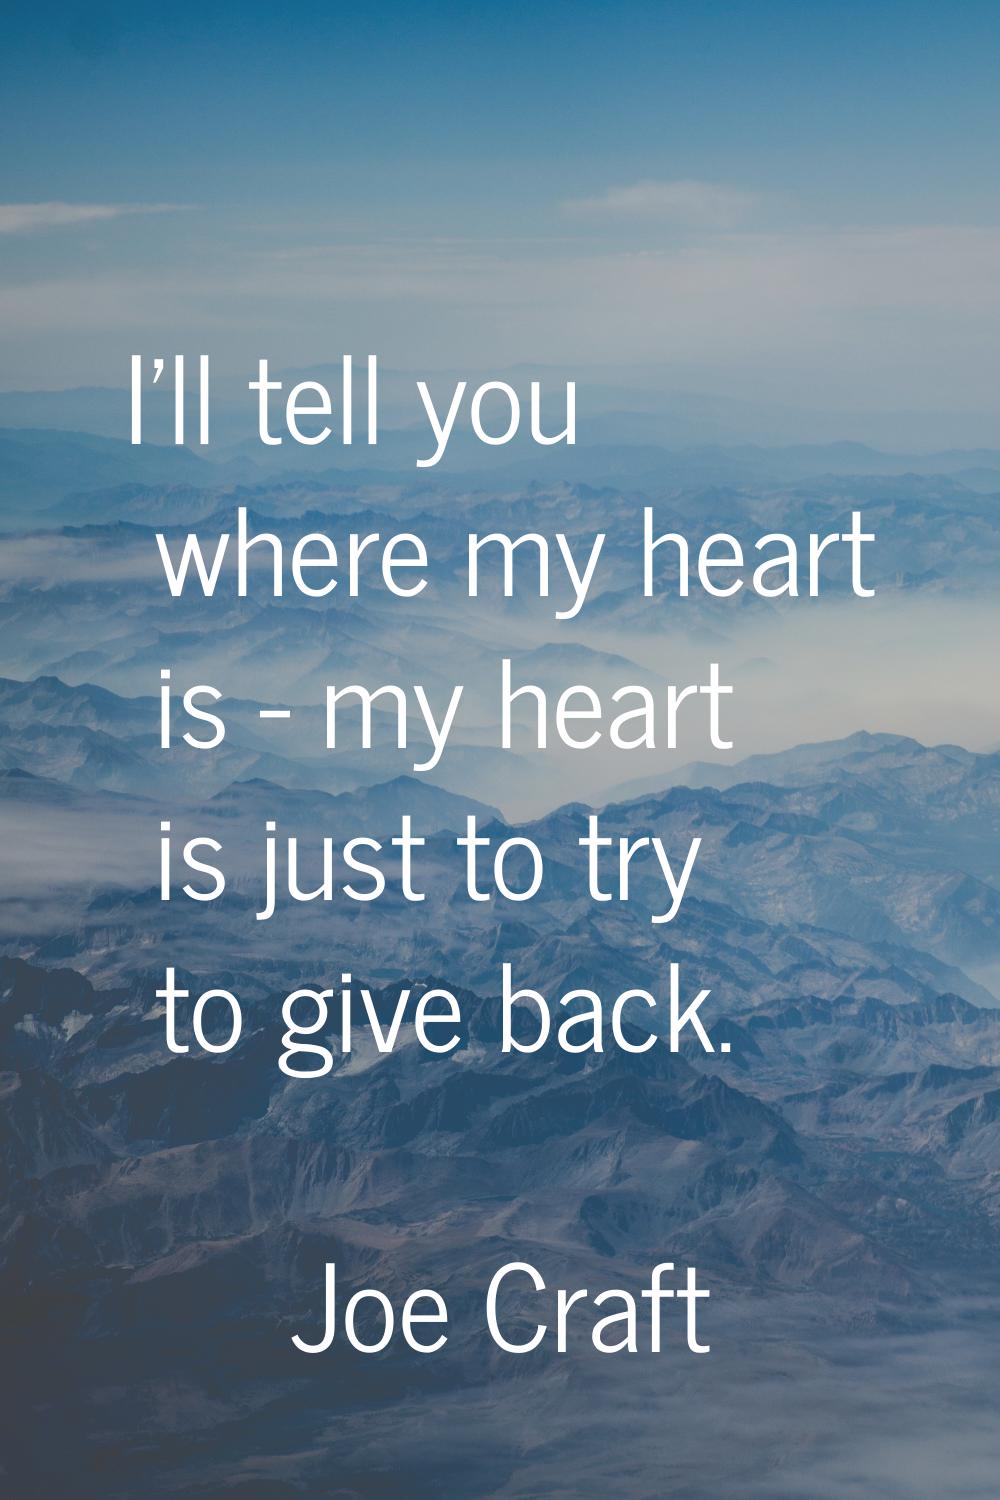 I'll tell you where my heart is - my heart is just to try to give back.